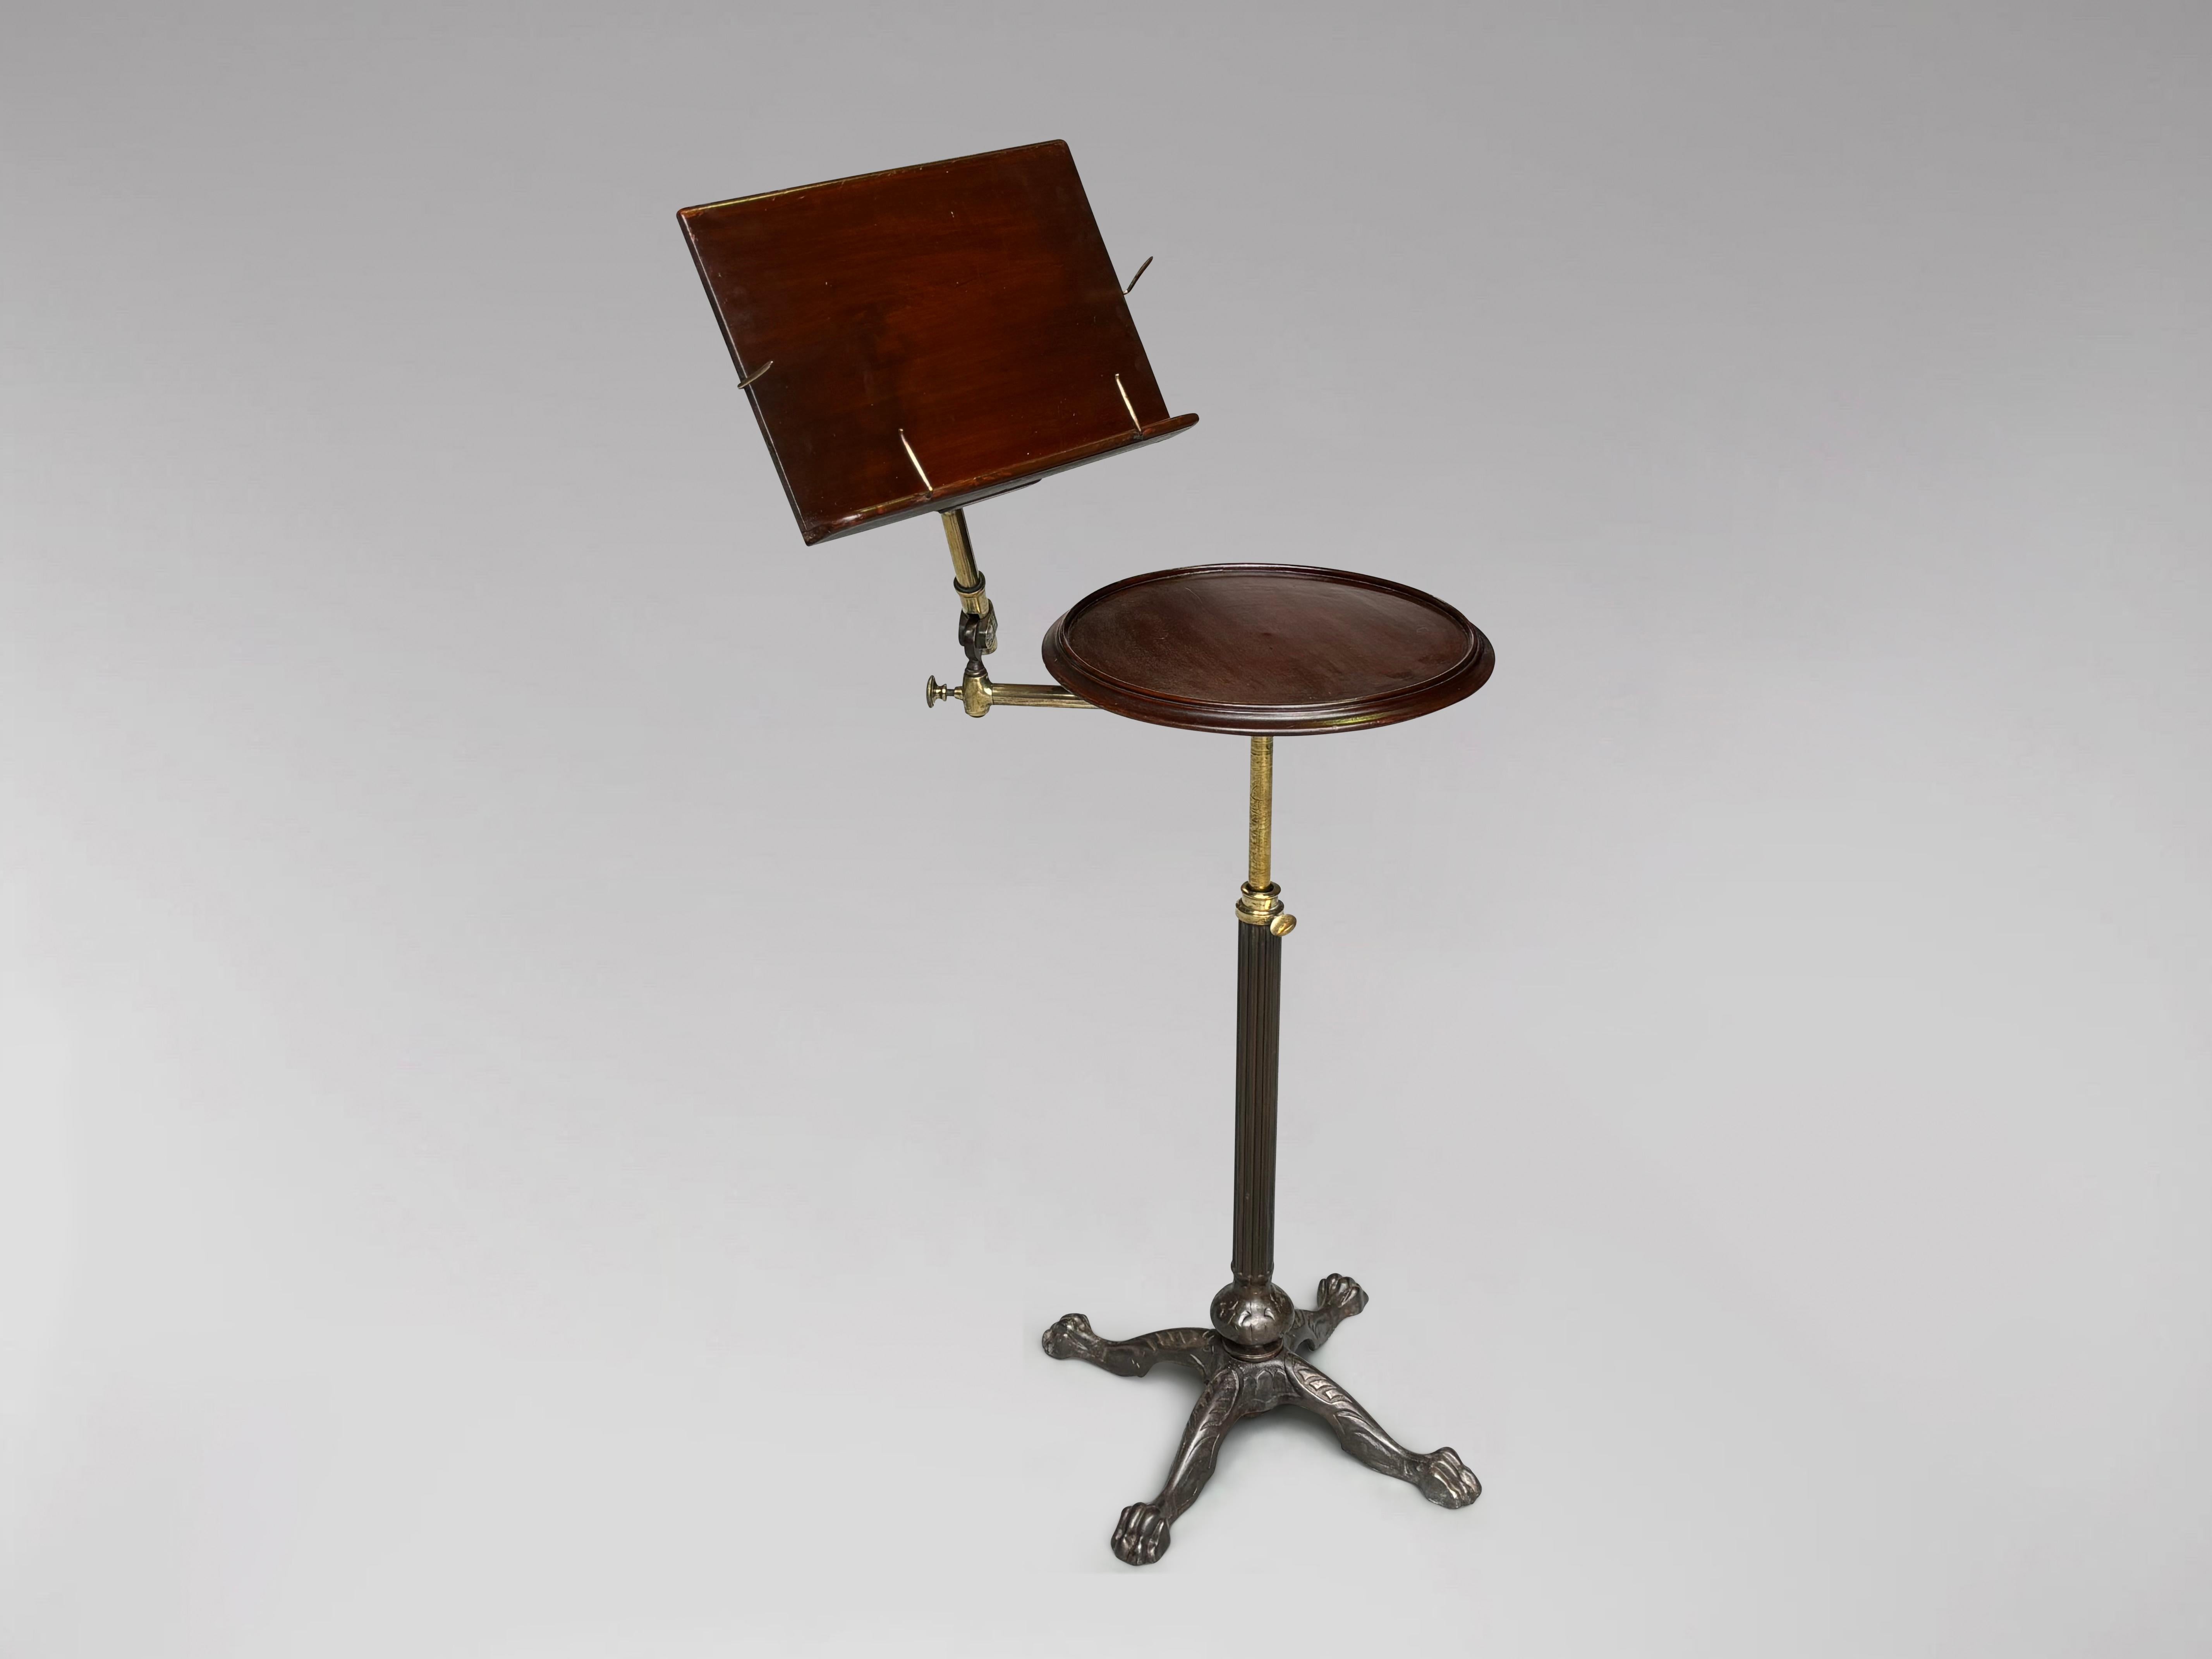 Superb quality late 19th century adjustable rectangular reading stand with circular table. Two solid mahogany tables which can be used flat or angled on a brass column with a brass adjustable mechanism above a heavy cast iron reeded column and